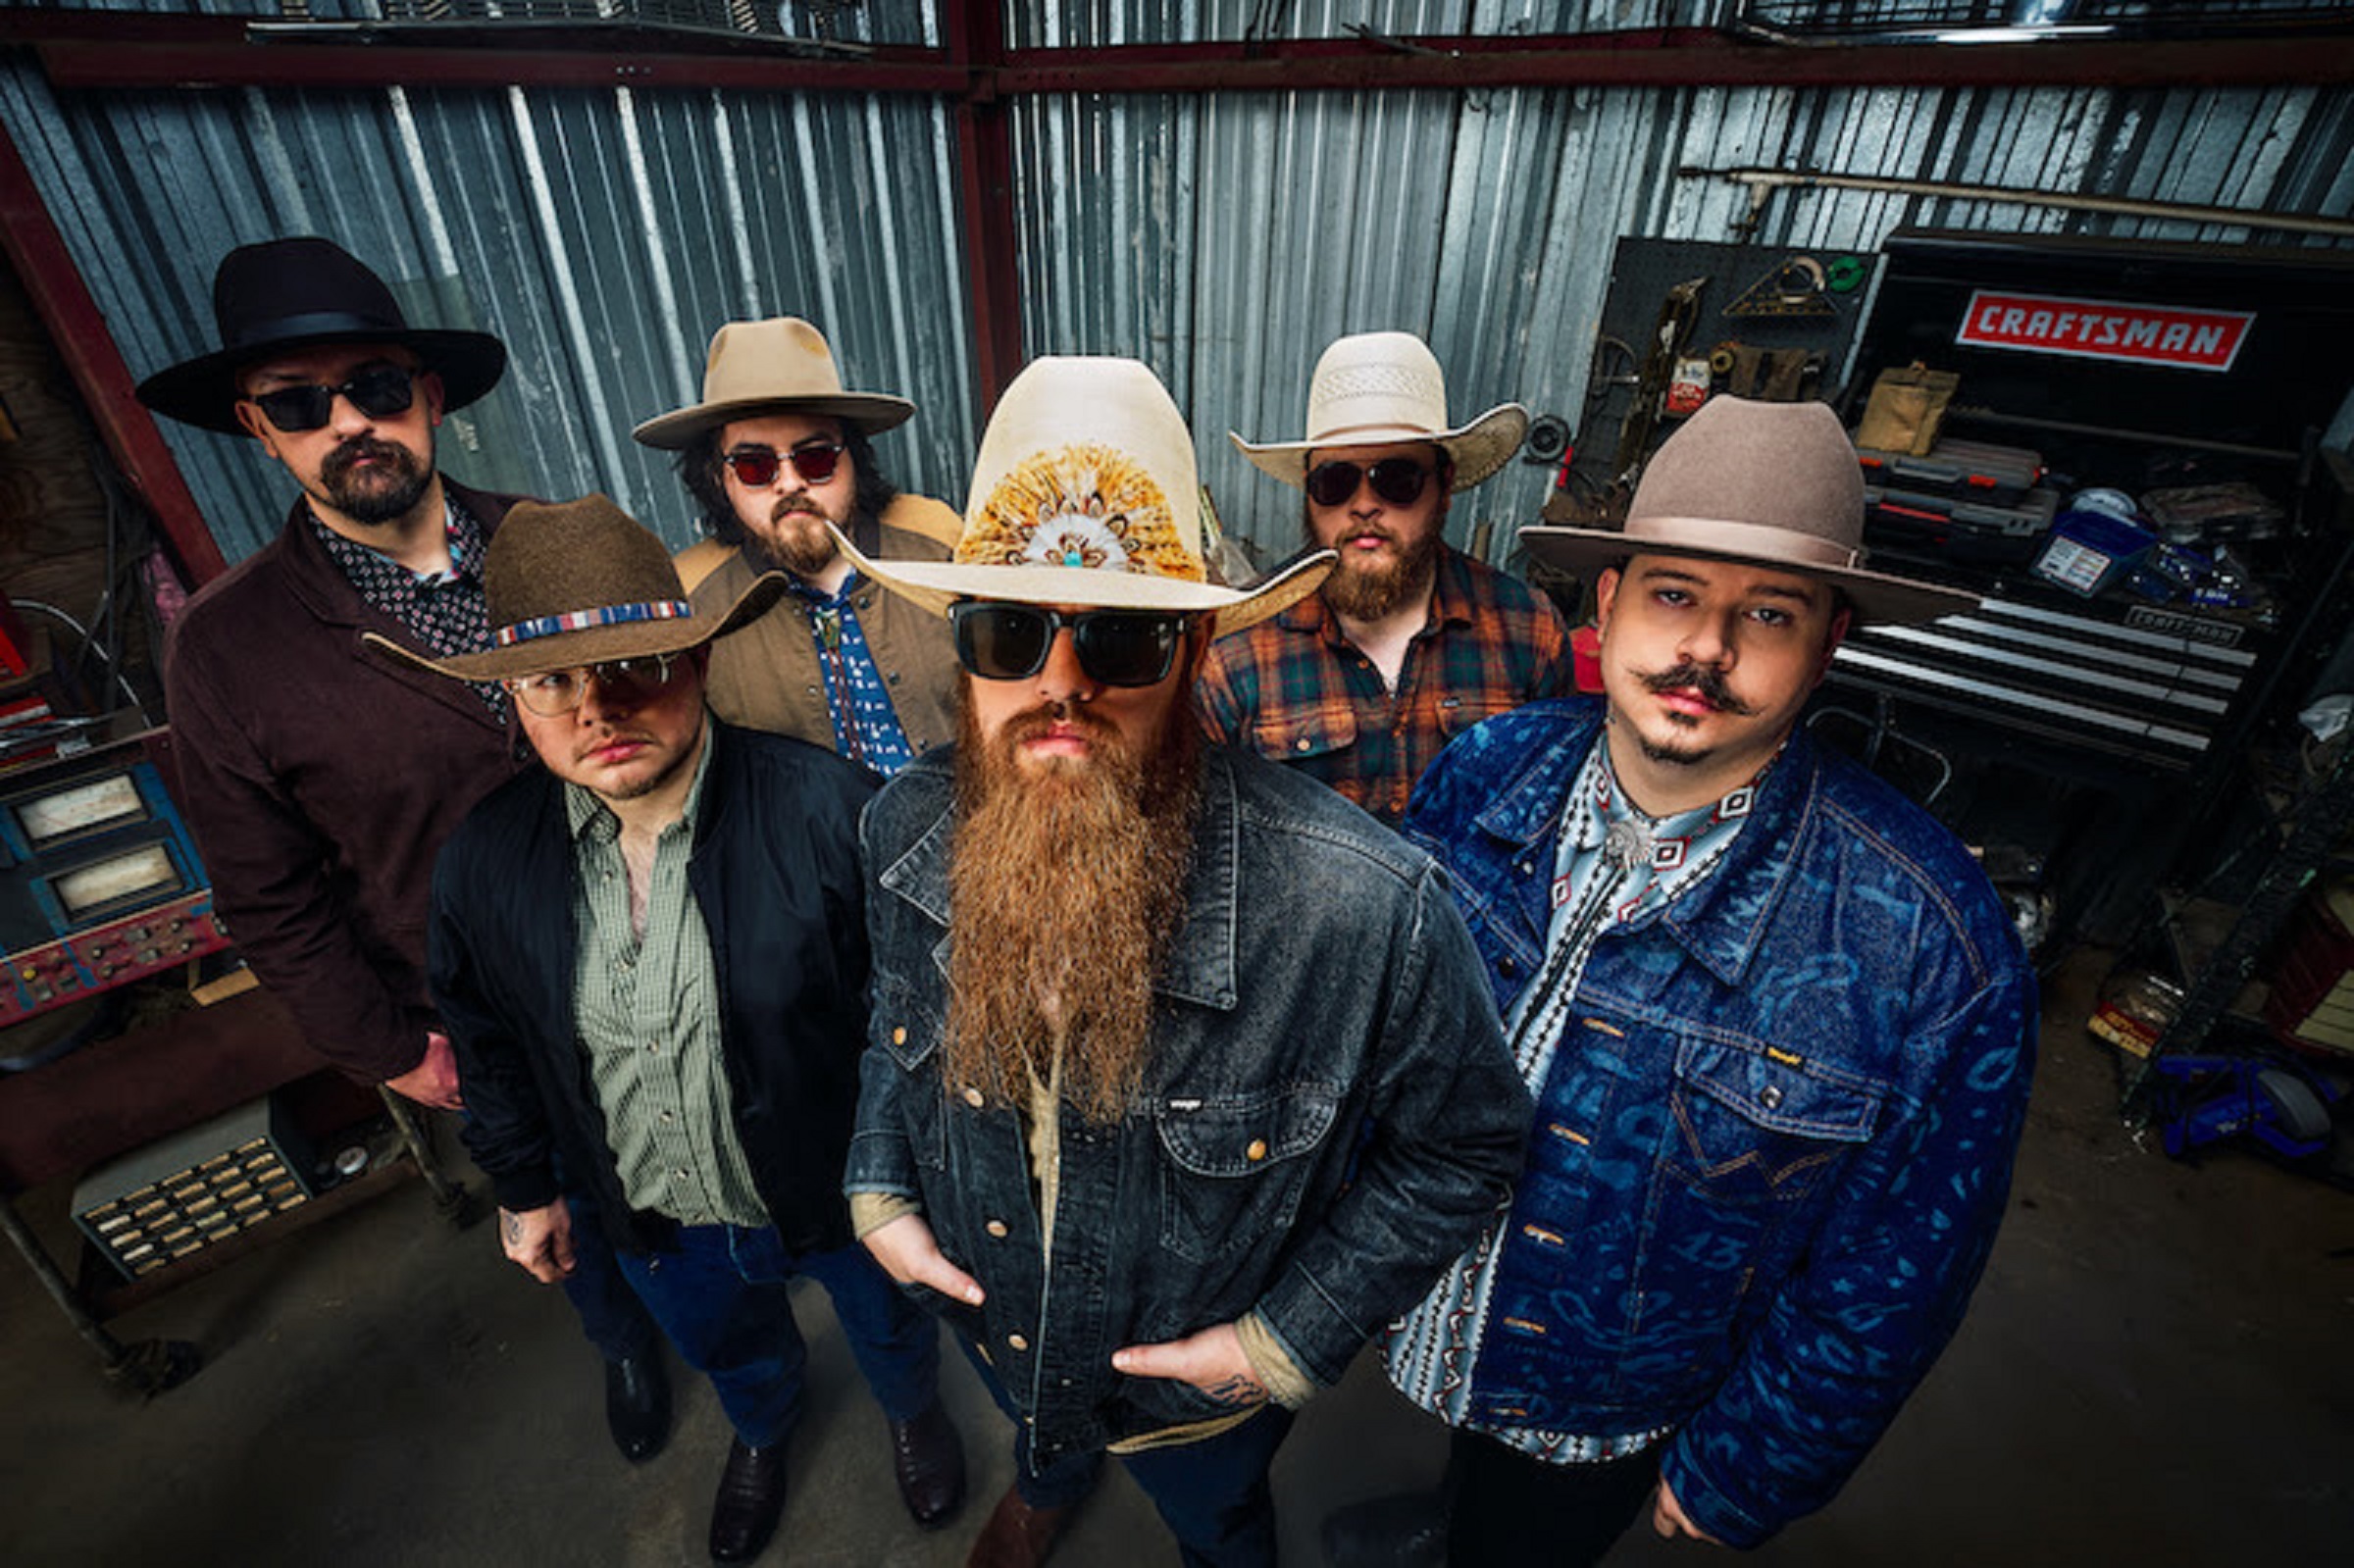 49 Winchester Return With "Leavin' This Holler" August 2 - Release New Single "Fast Asleep" Today